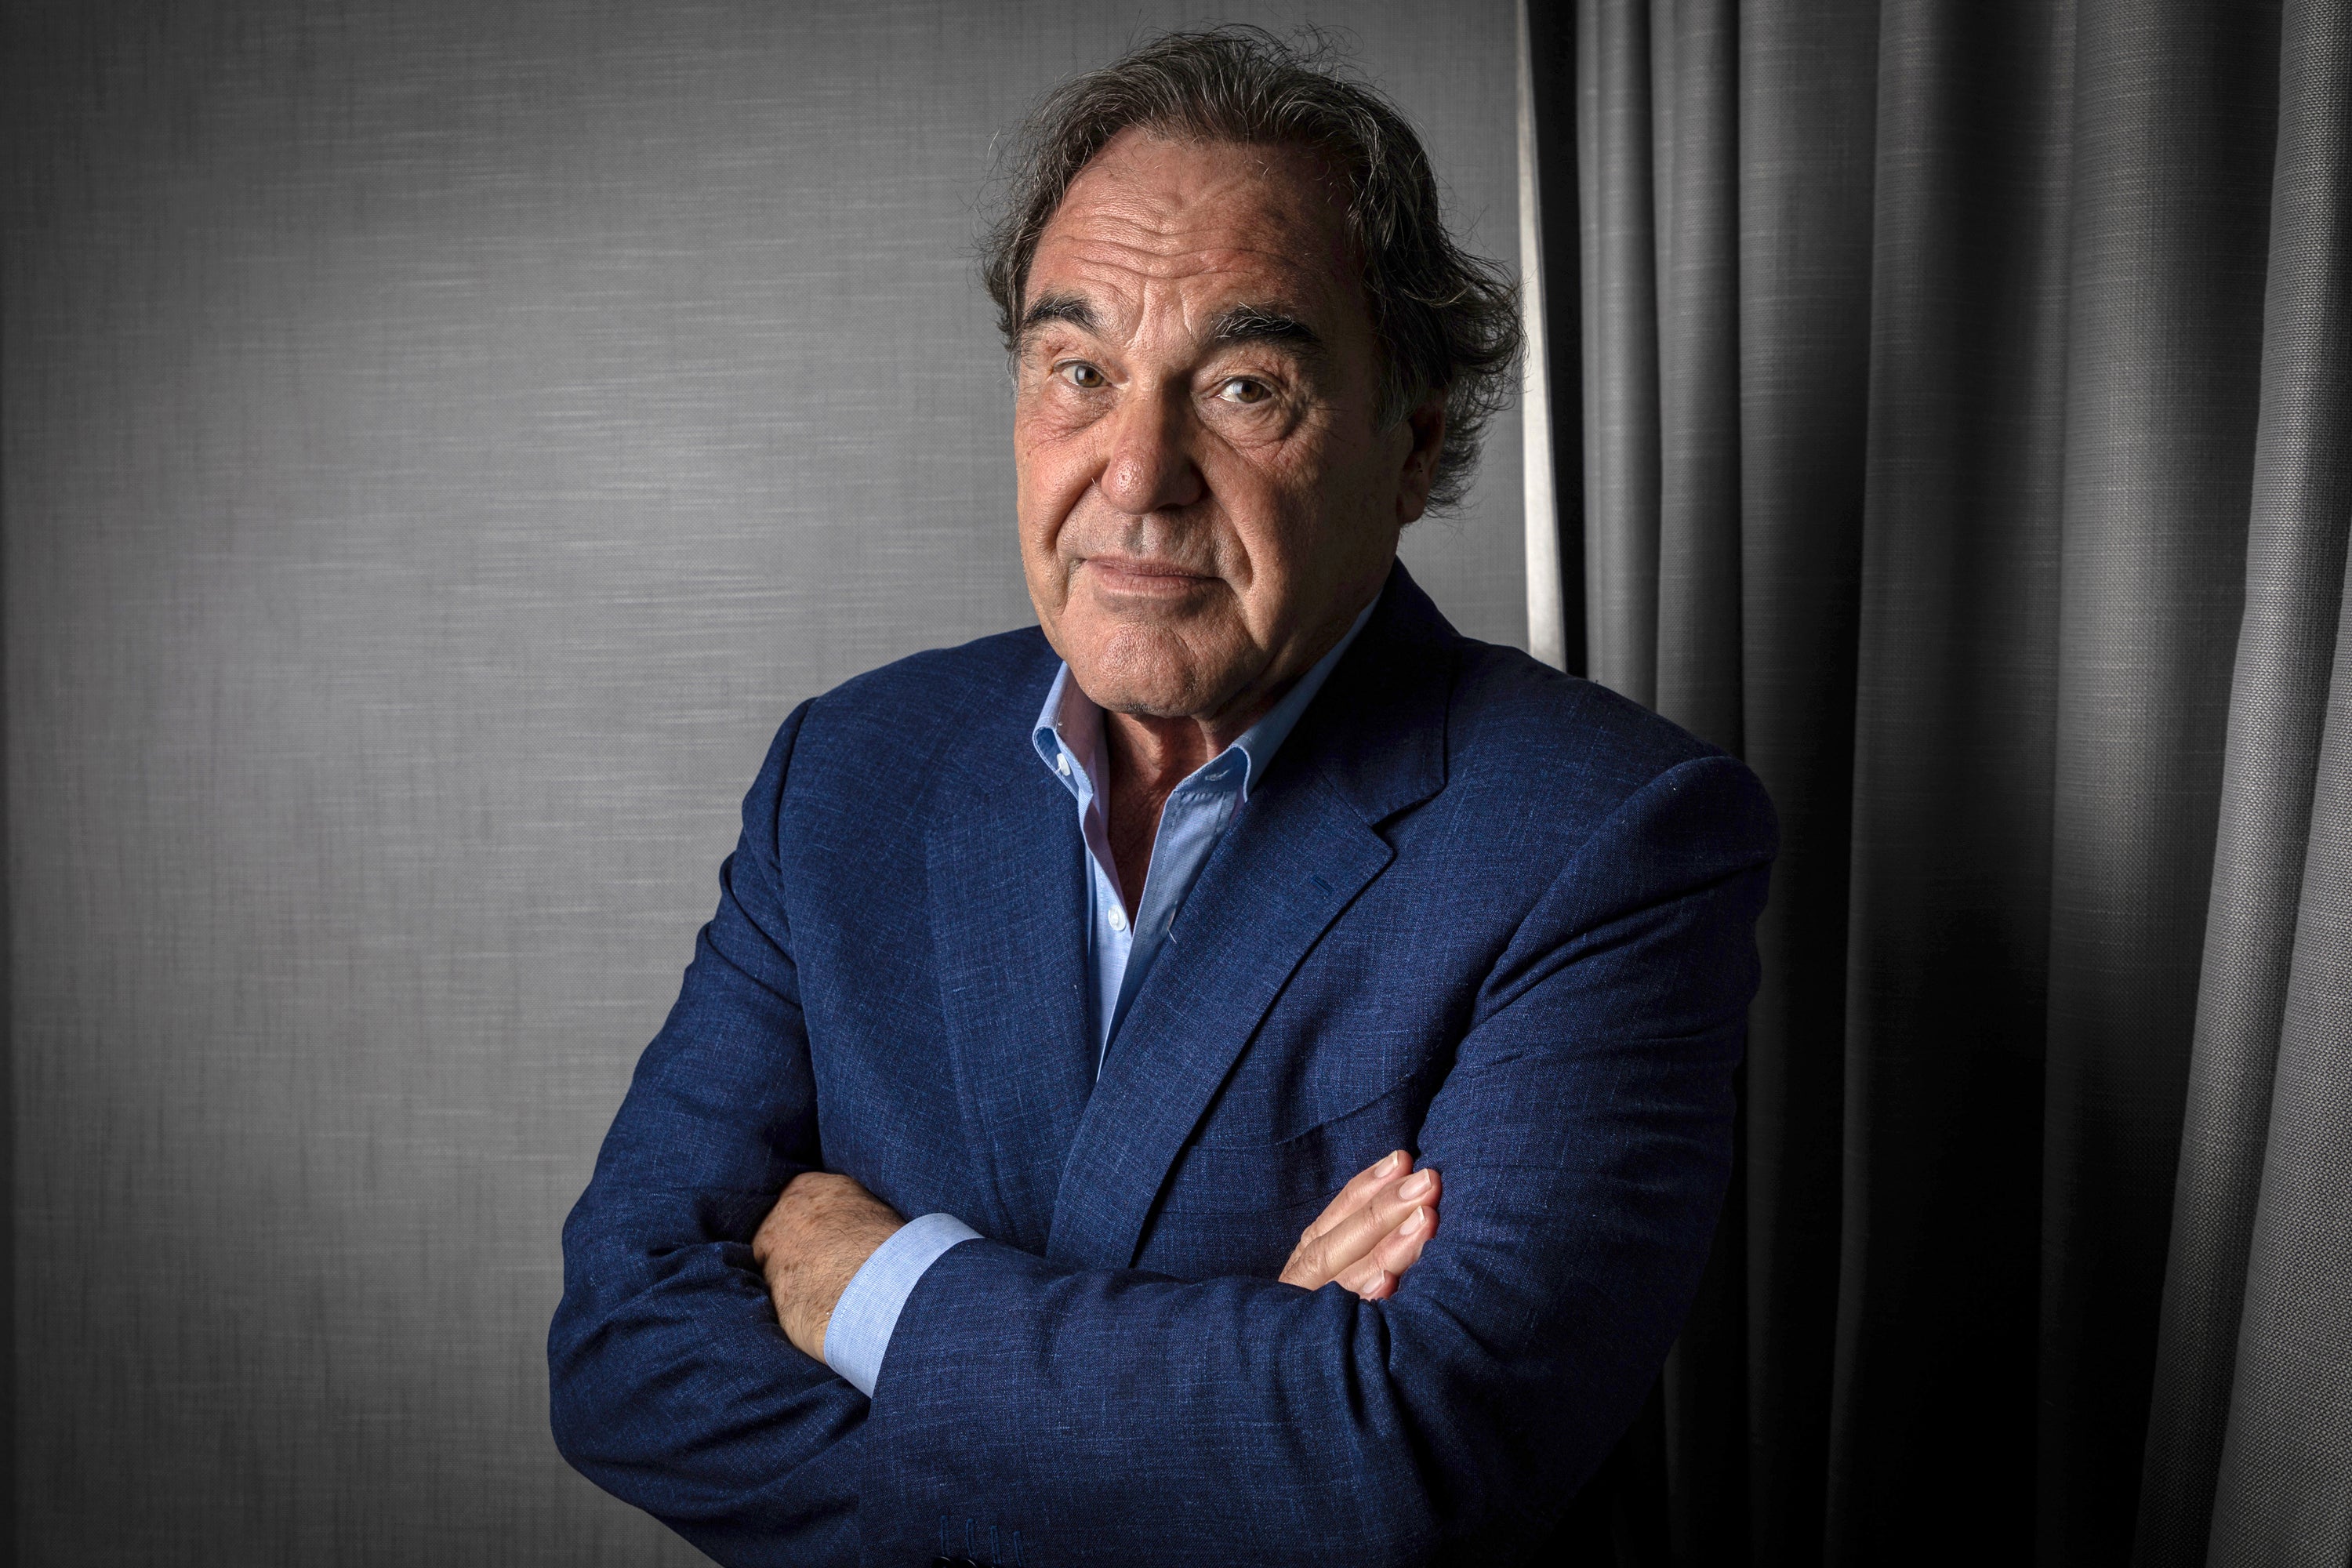 CANNES-OLIVER STONE